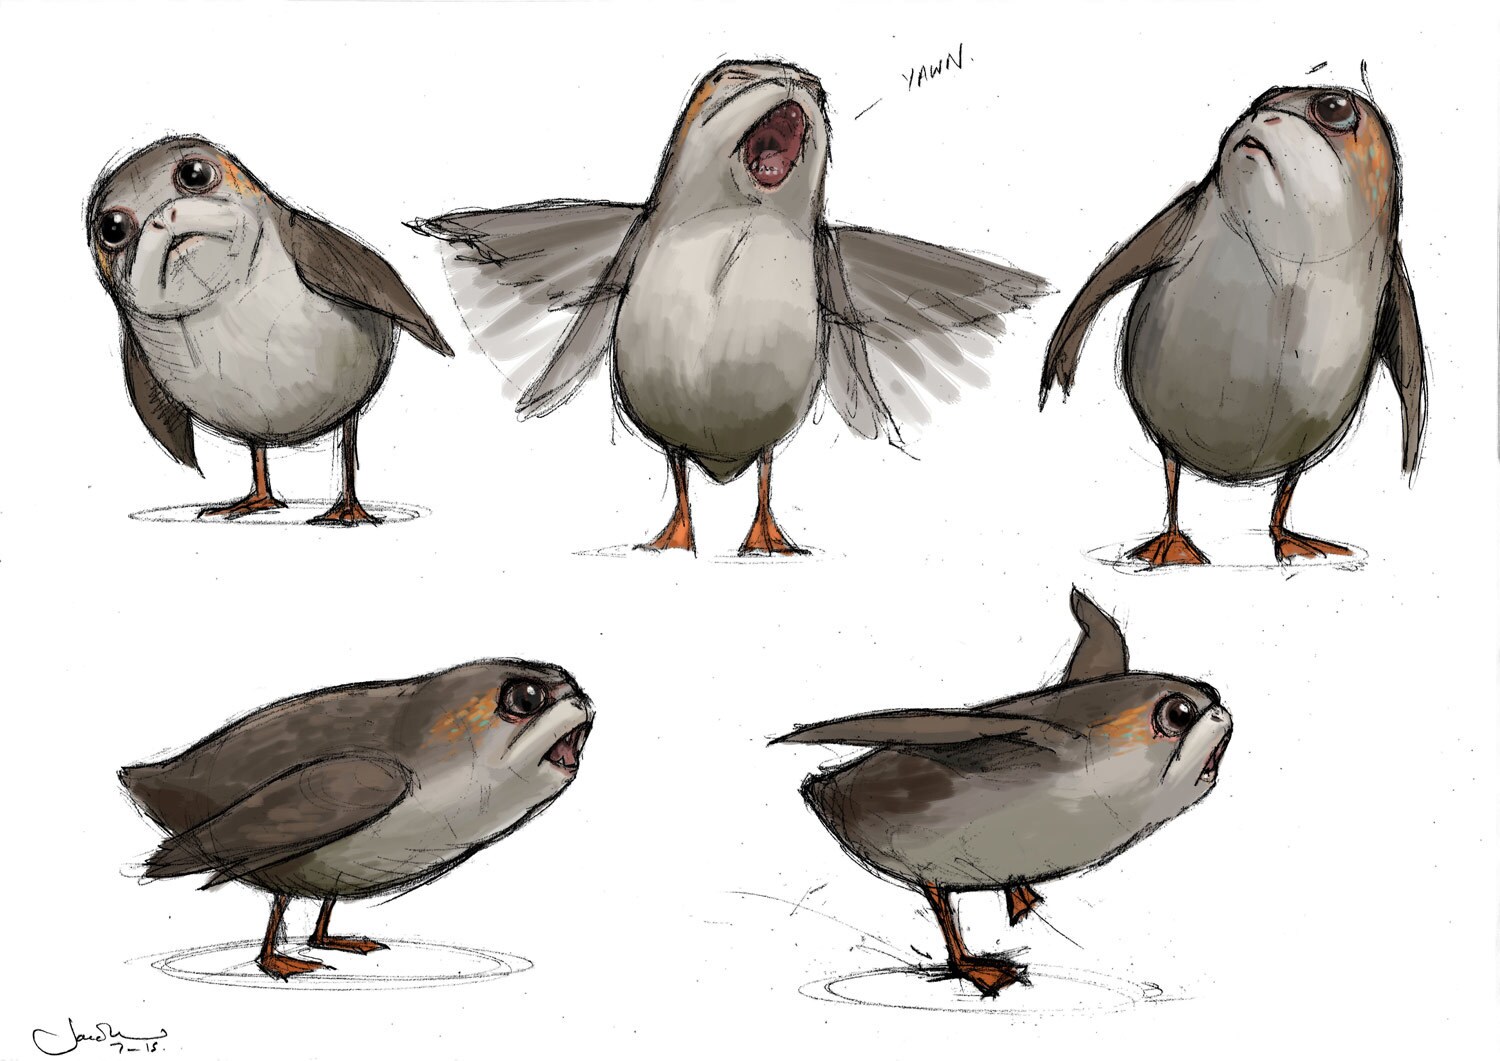 Concept art of porgs looking around and squawking.